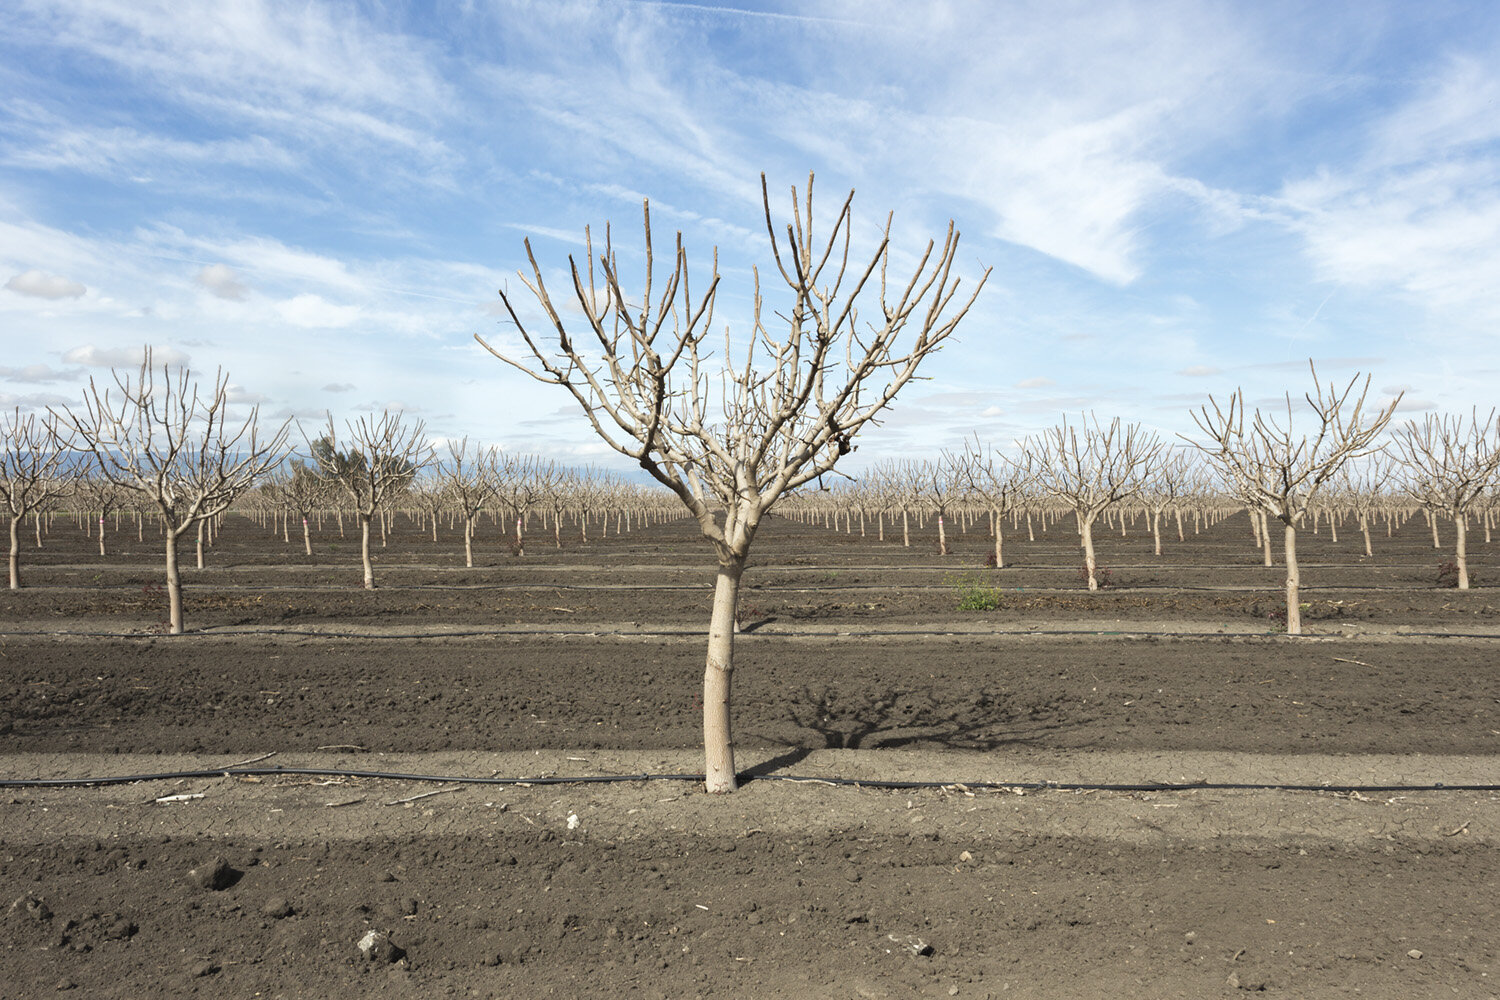 San Joaquin Valley Orchard, Study #1. Buttonwillow, CA. 2019 (35°22'12.396" N 119°28'3.522" W)